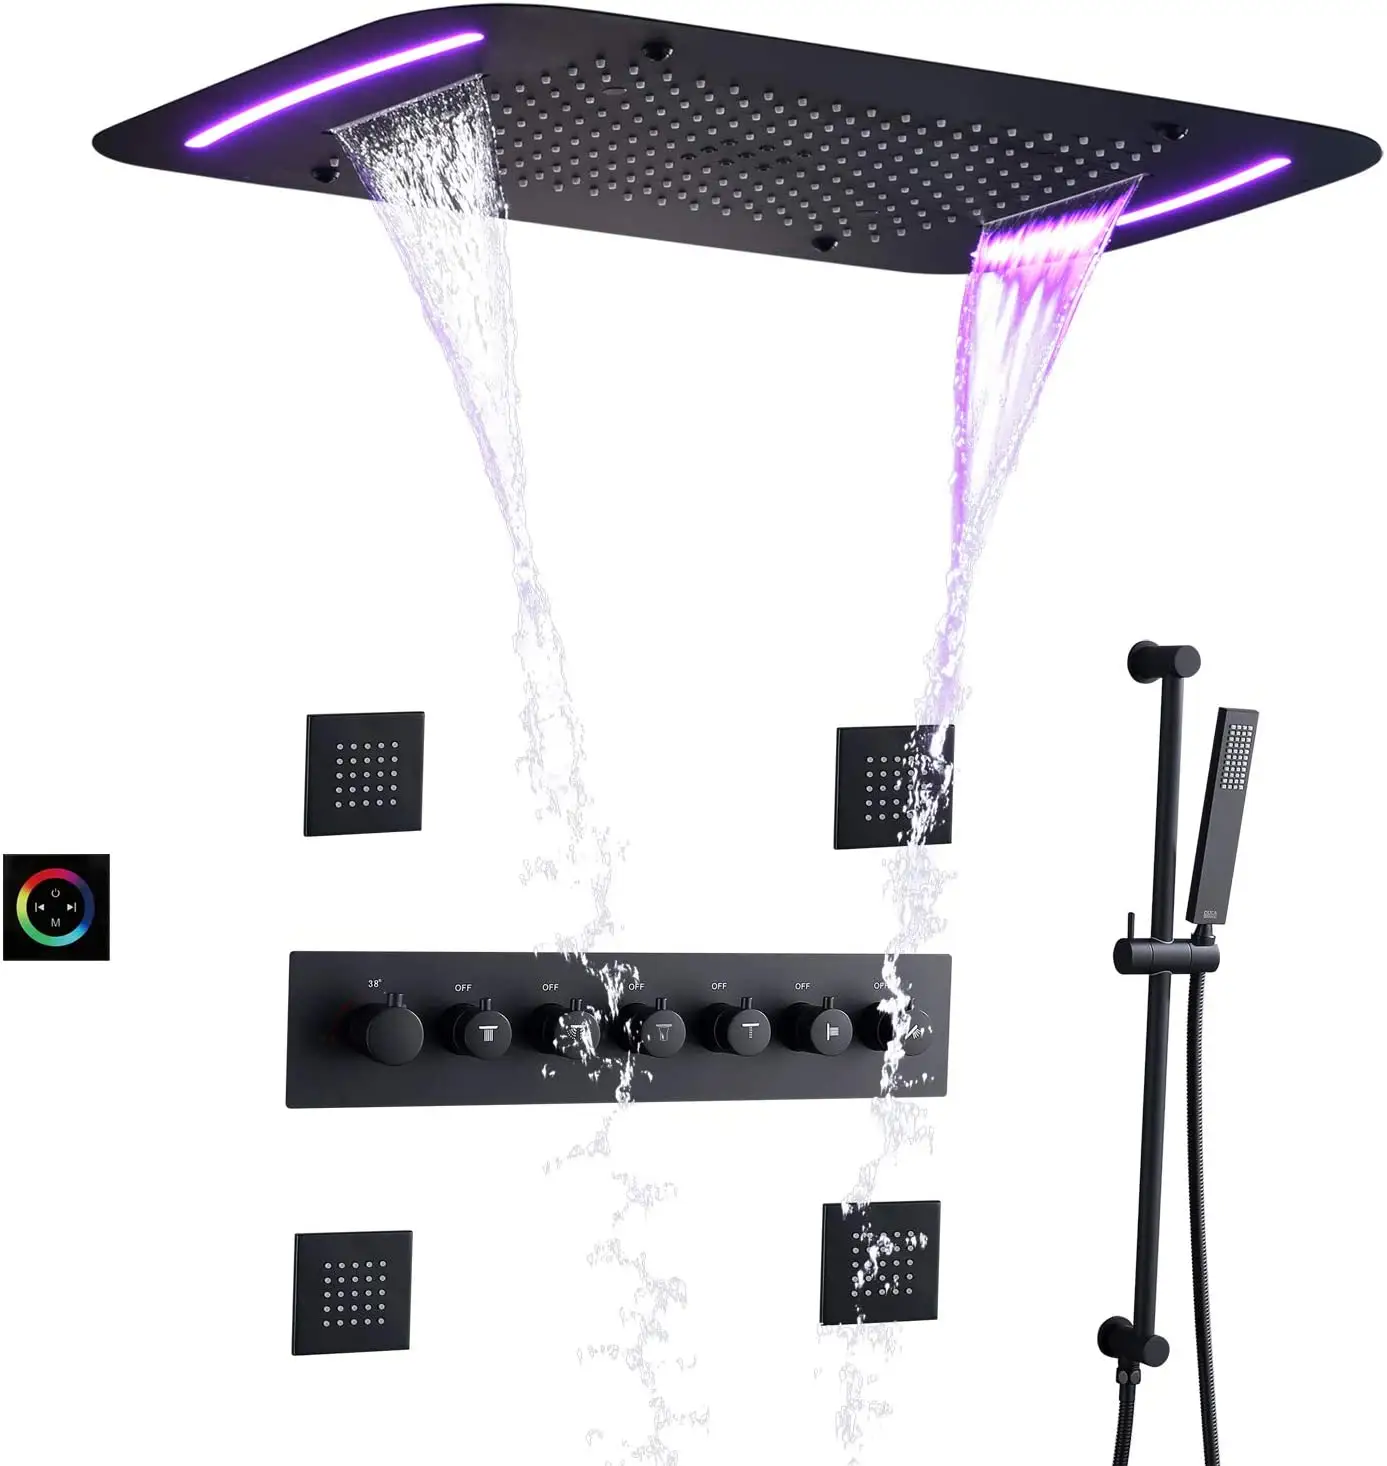 Thermostatic Matte Black Shower System Set 28X17 Inch Large Bathroom Atomizing Bubble Waterfall Rain Shower Head With LED Panel